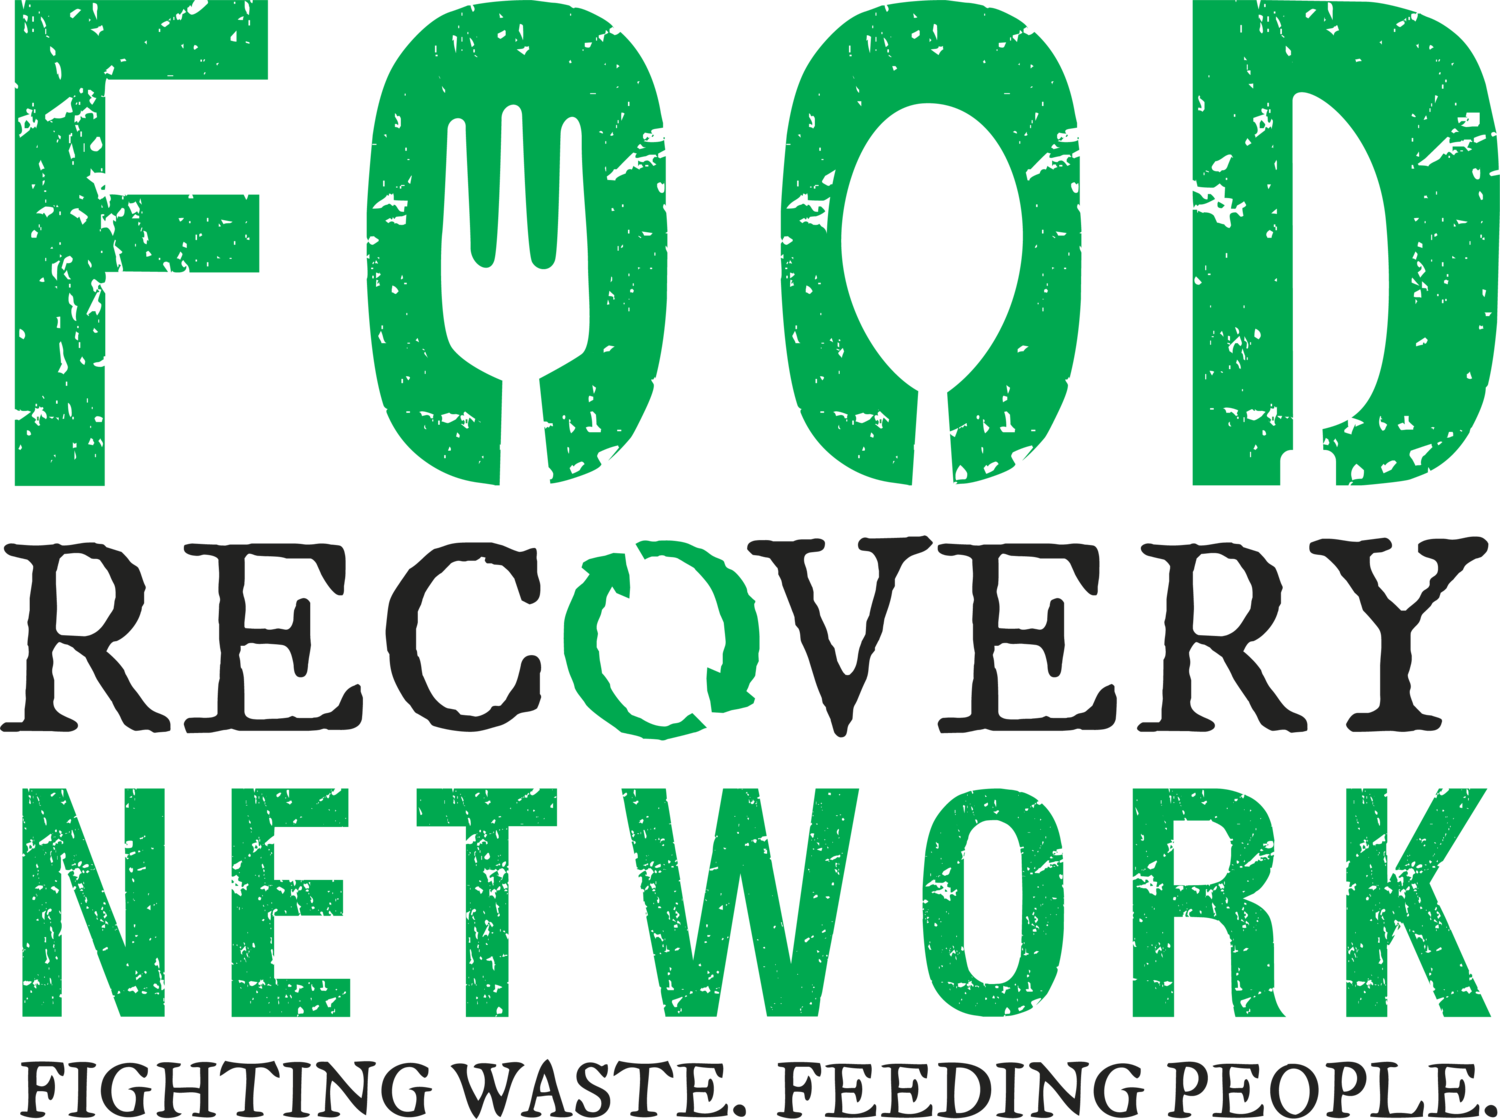 Food Recovery Network logo